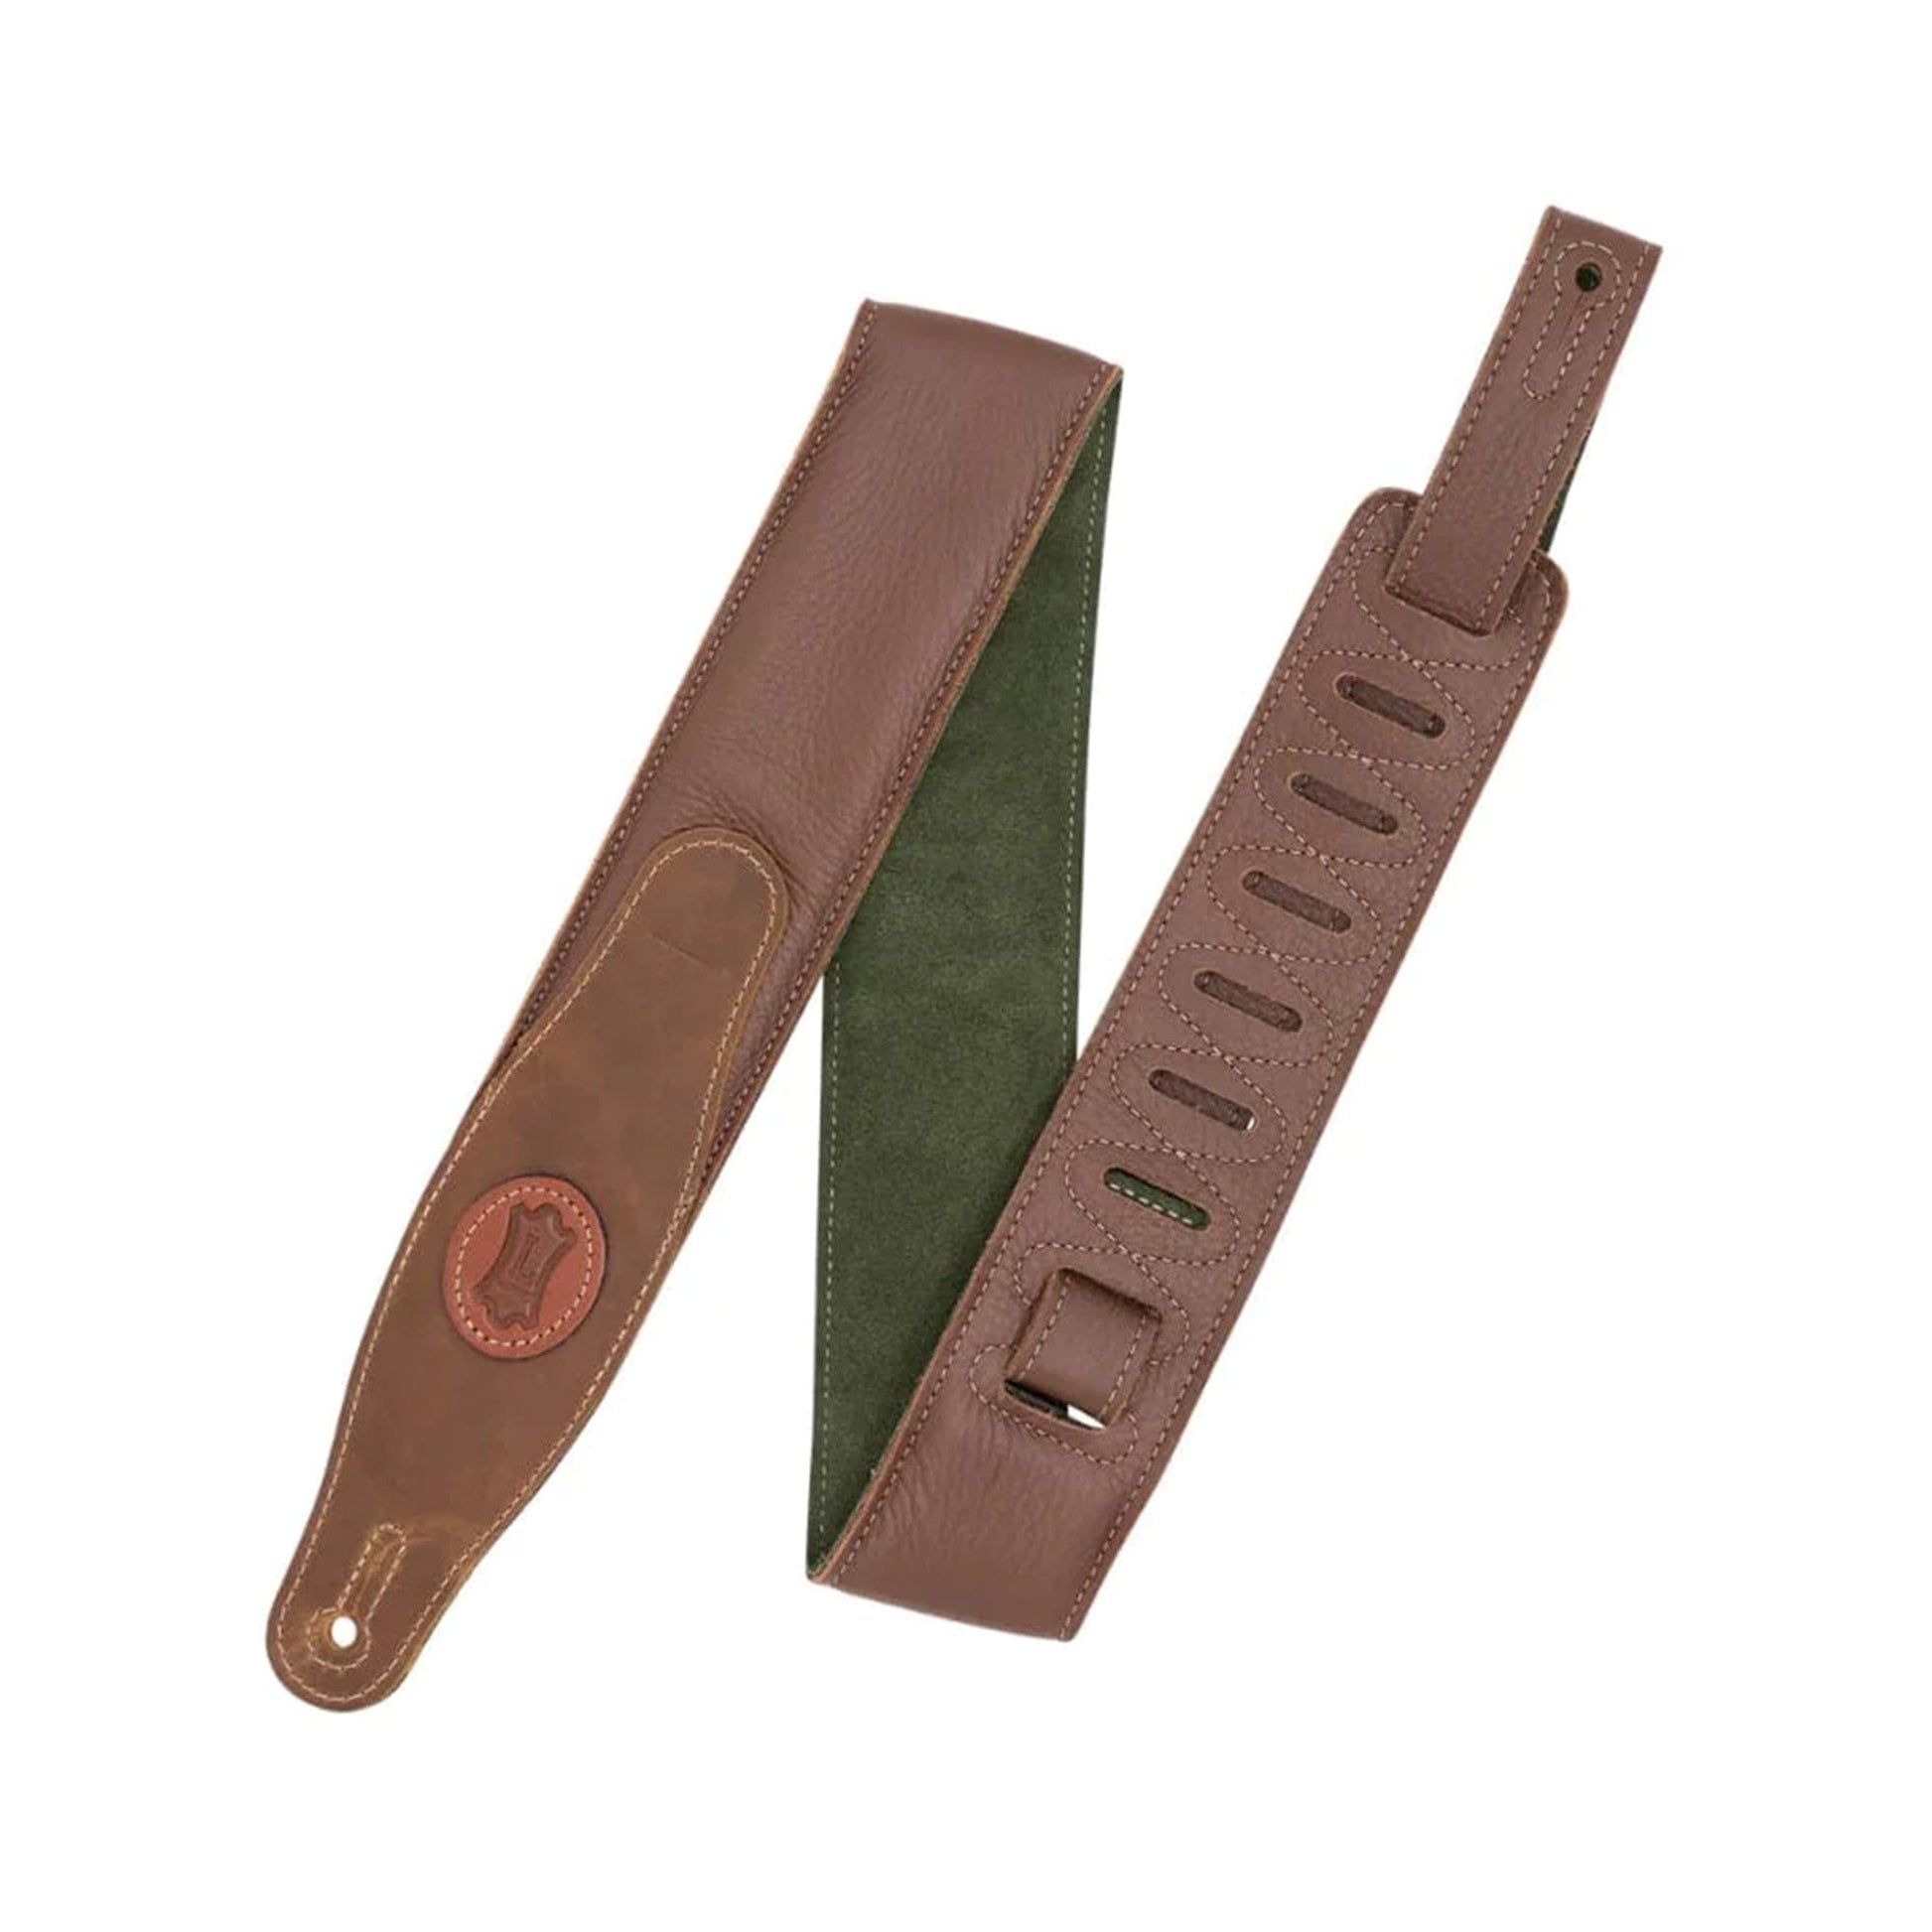 Levy's 3" Padded Garment Leather Strap Brown w/Olive Green Suede Backing Accessories / Straps